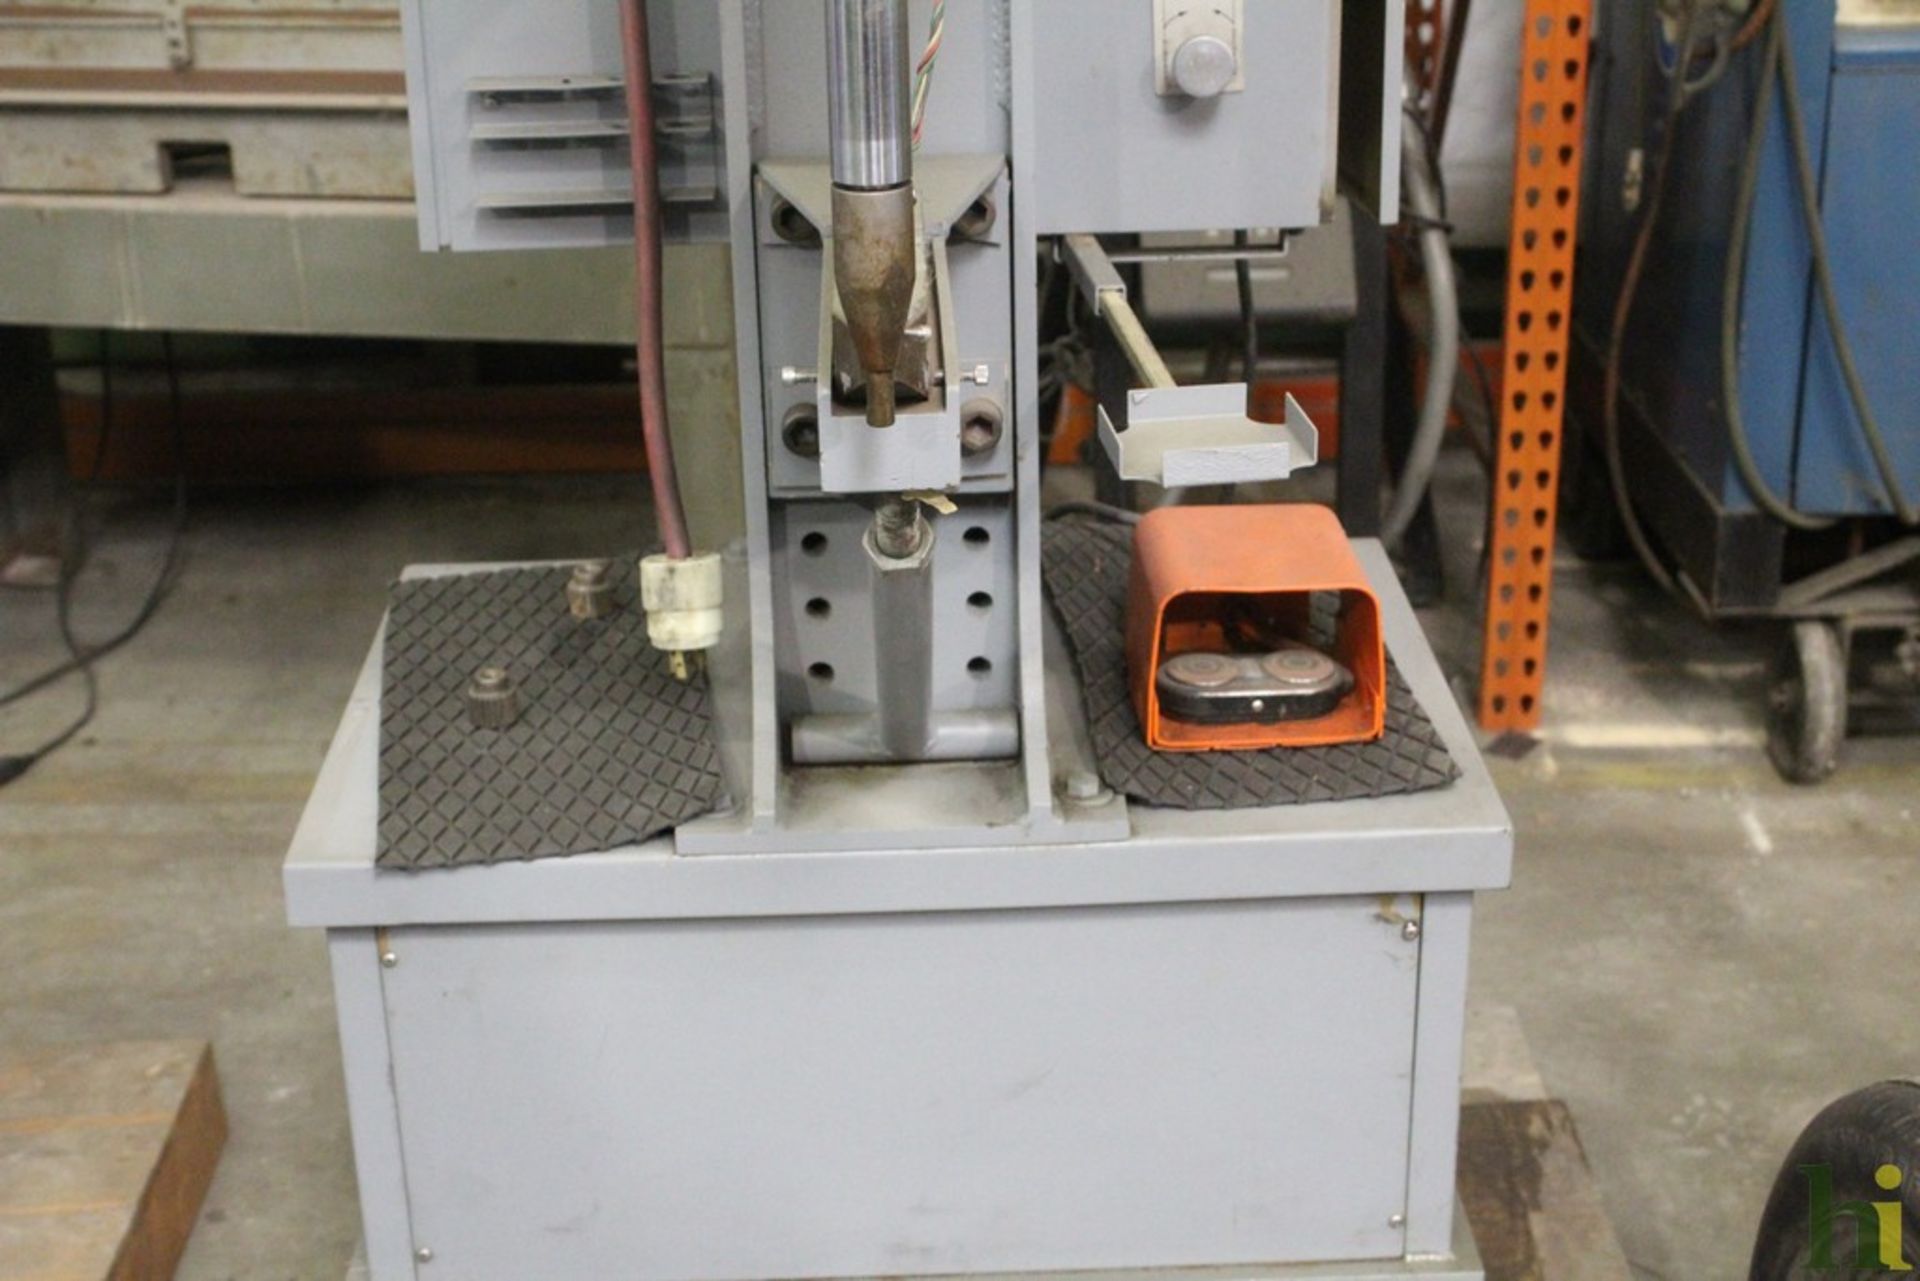 HAEGER MODEL HP-6 INSERTION PRESS, S/N 008, WITH BOWL - Image 3 of 3